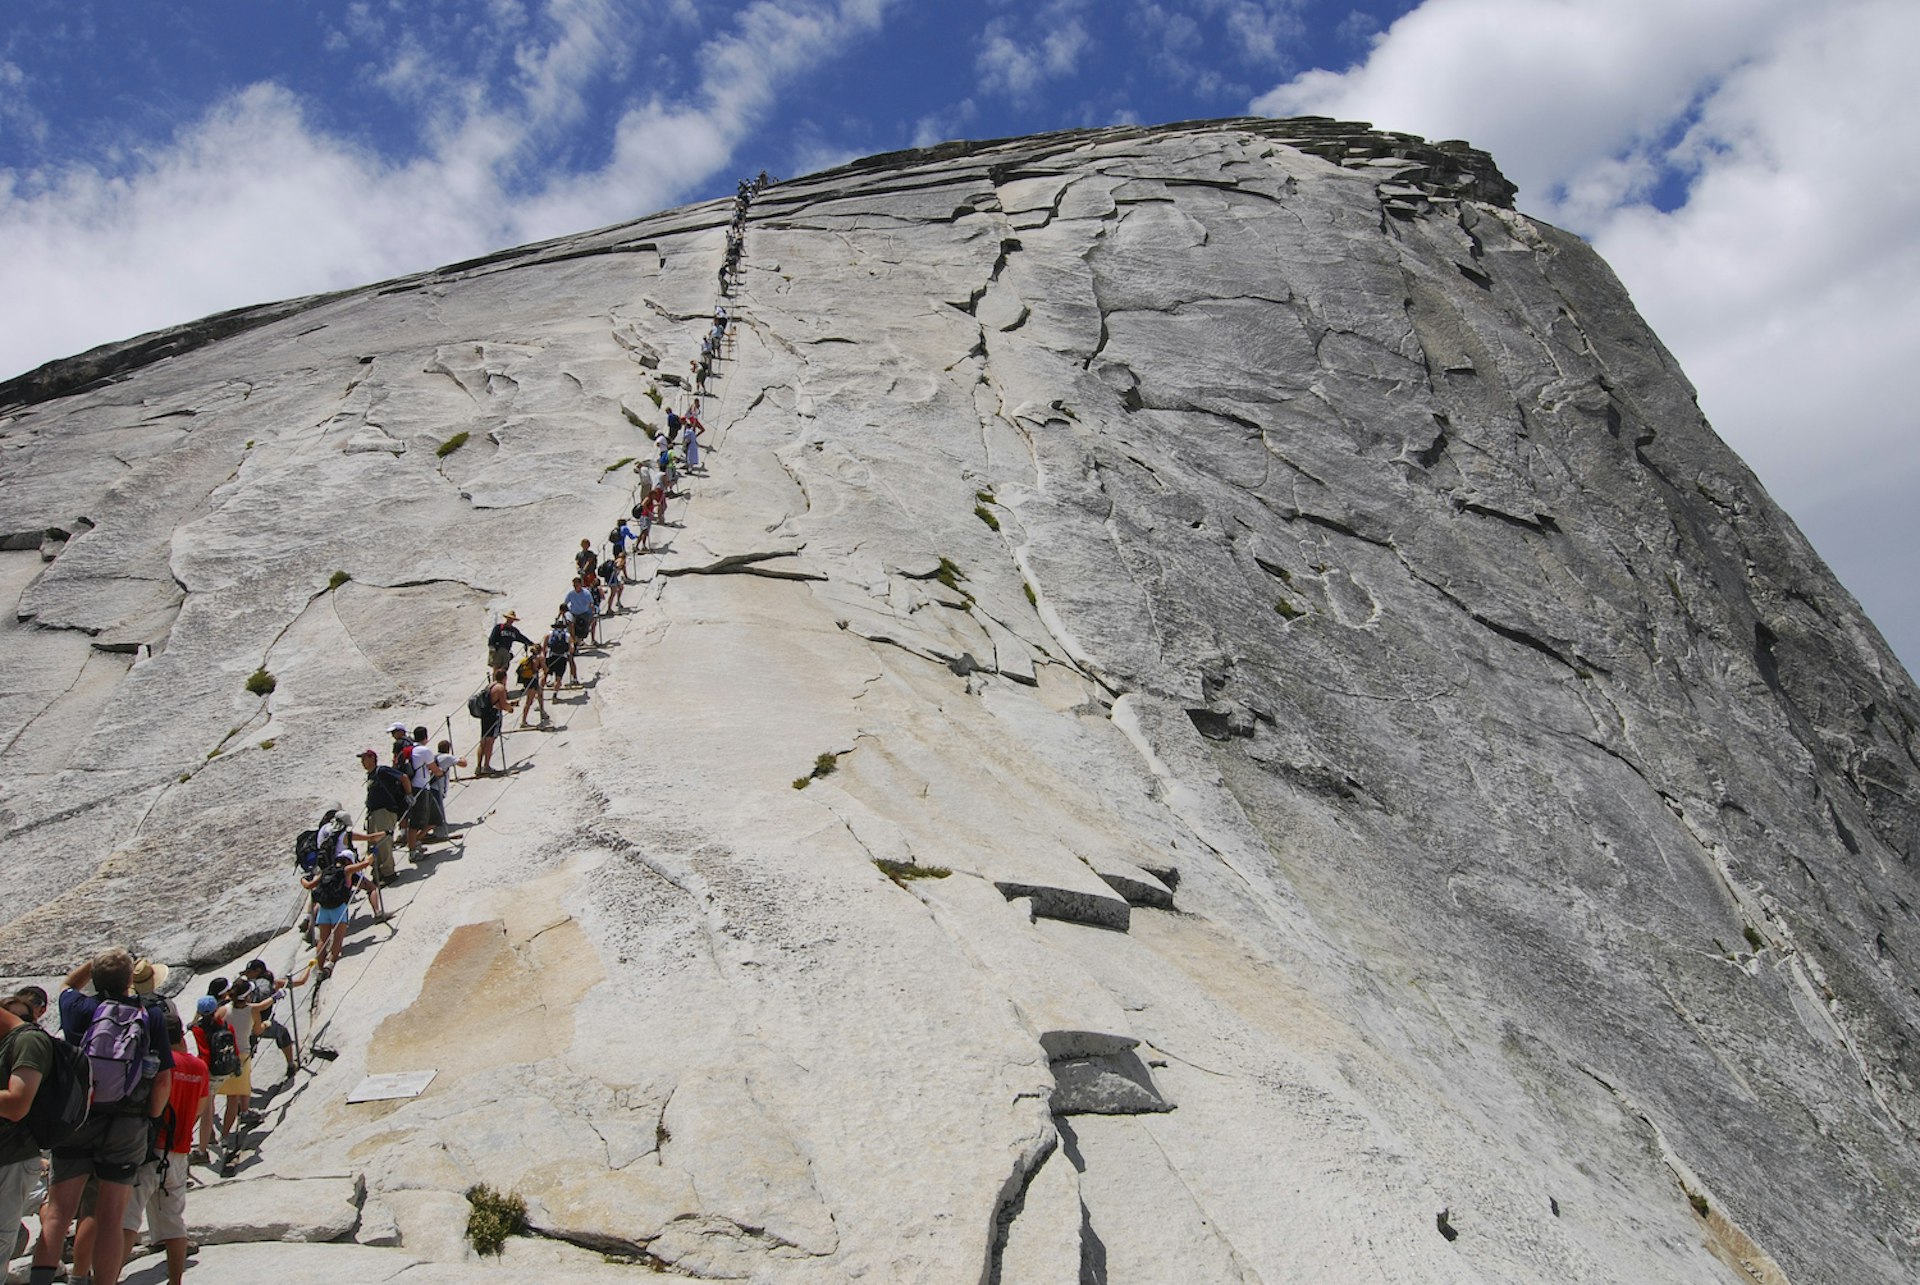 A line of hikers ascends to the top of Half Dome, Yosemite National Park, California, USA